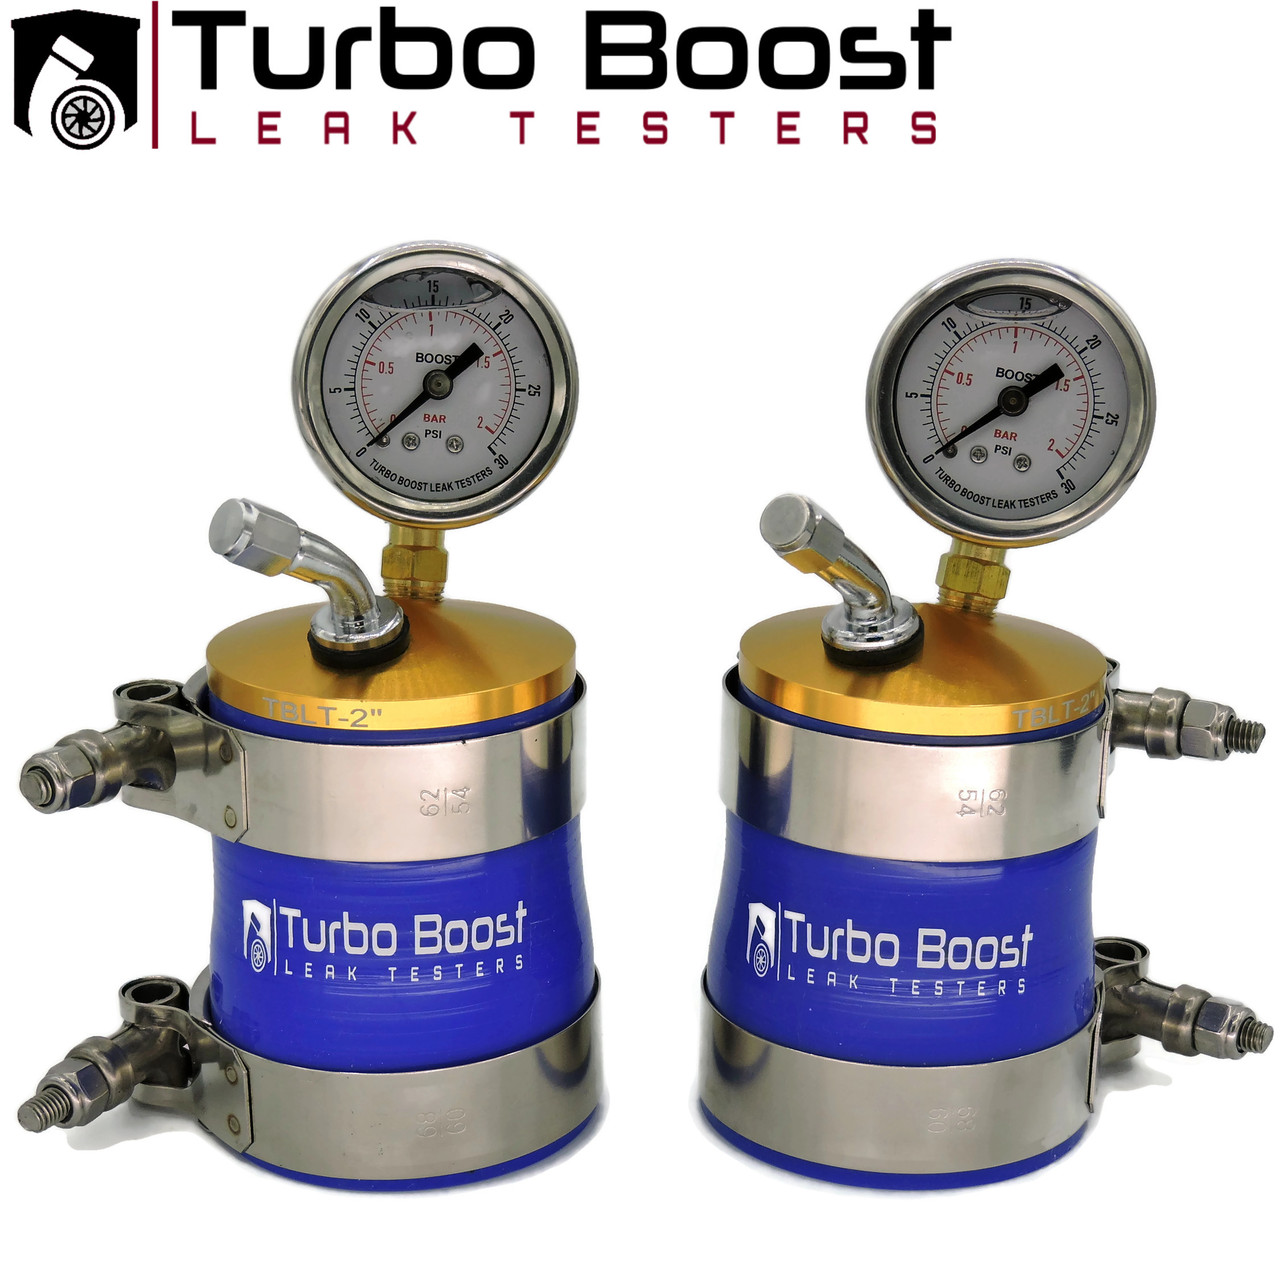 Turbo Boost Leak Tester Kit 2013+ 4.0T for the 2.5" SRM Inlets - Billet Alum Test upto 30 PSI - Includes PCV & BPV caps and new SRM inlet O-rings